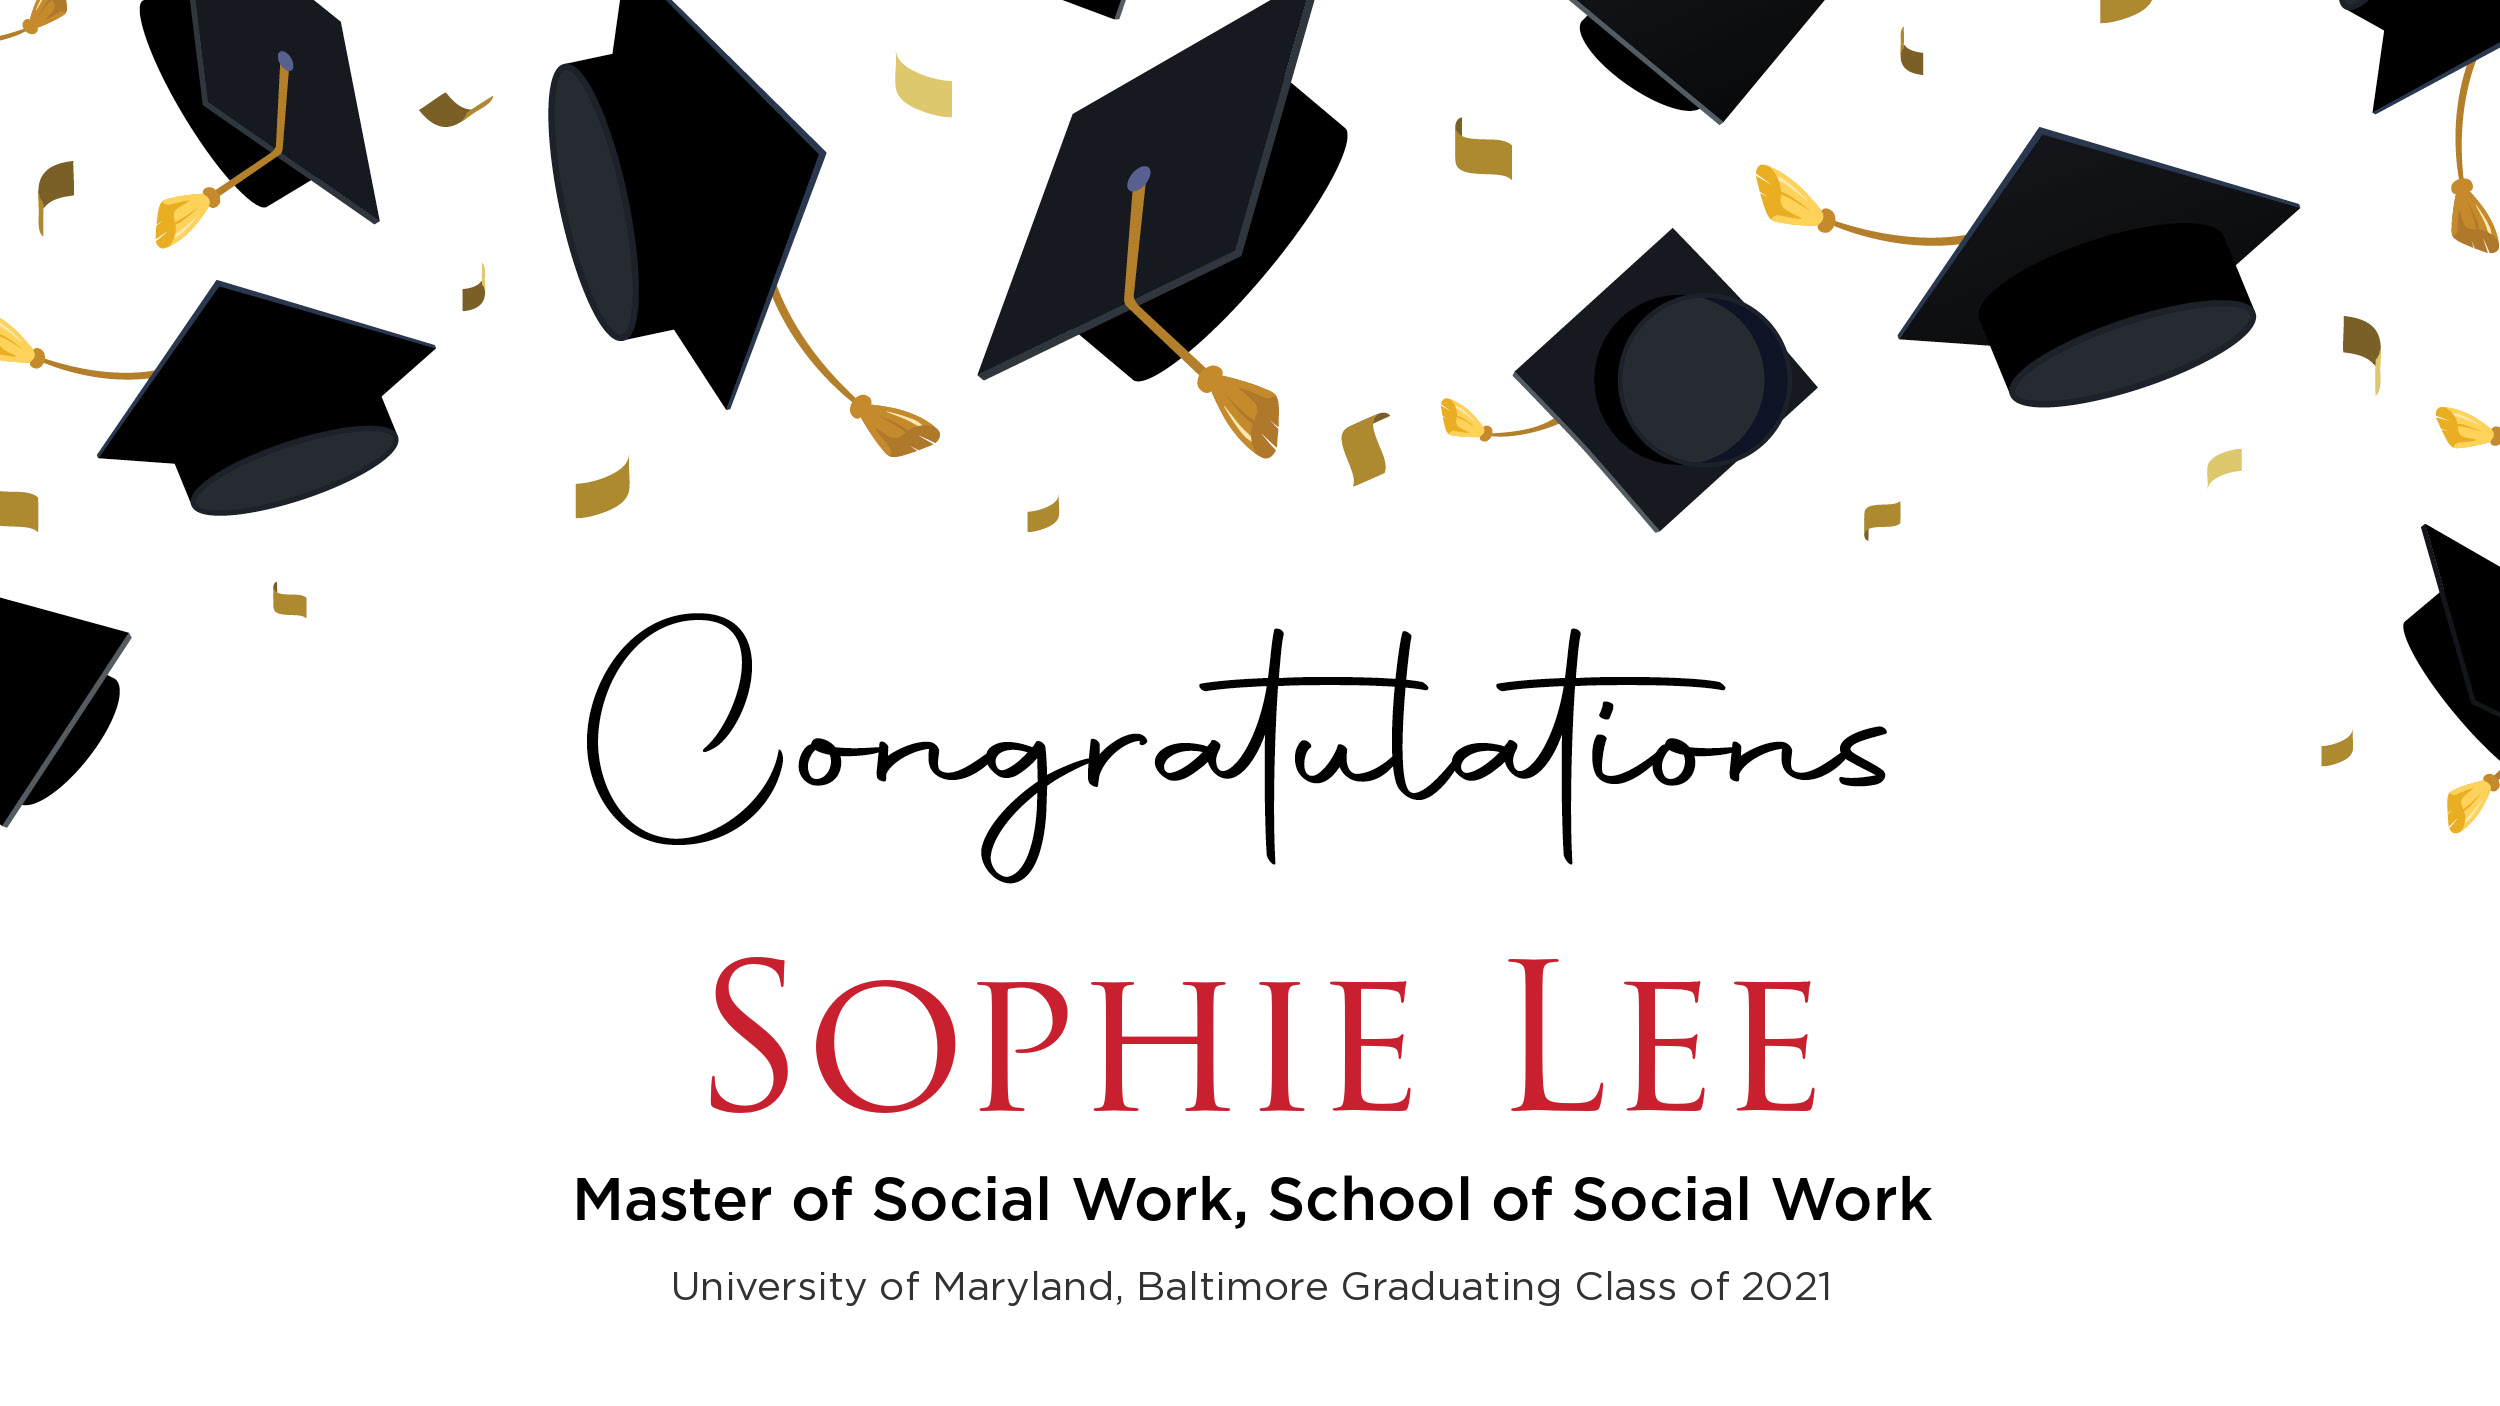 Congratulations Sophie Lee, Master of Social Work